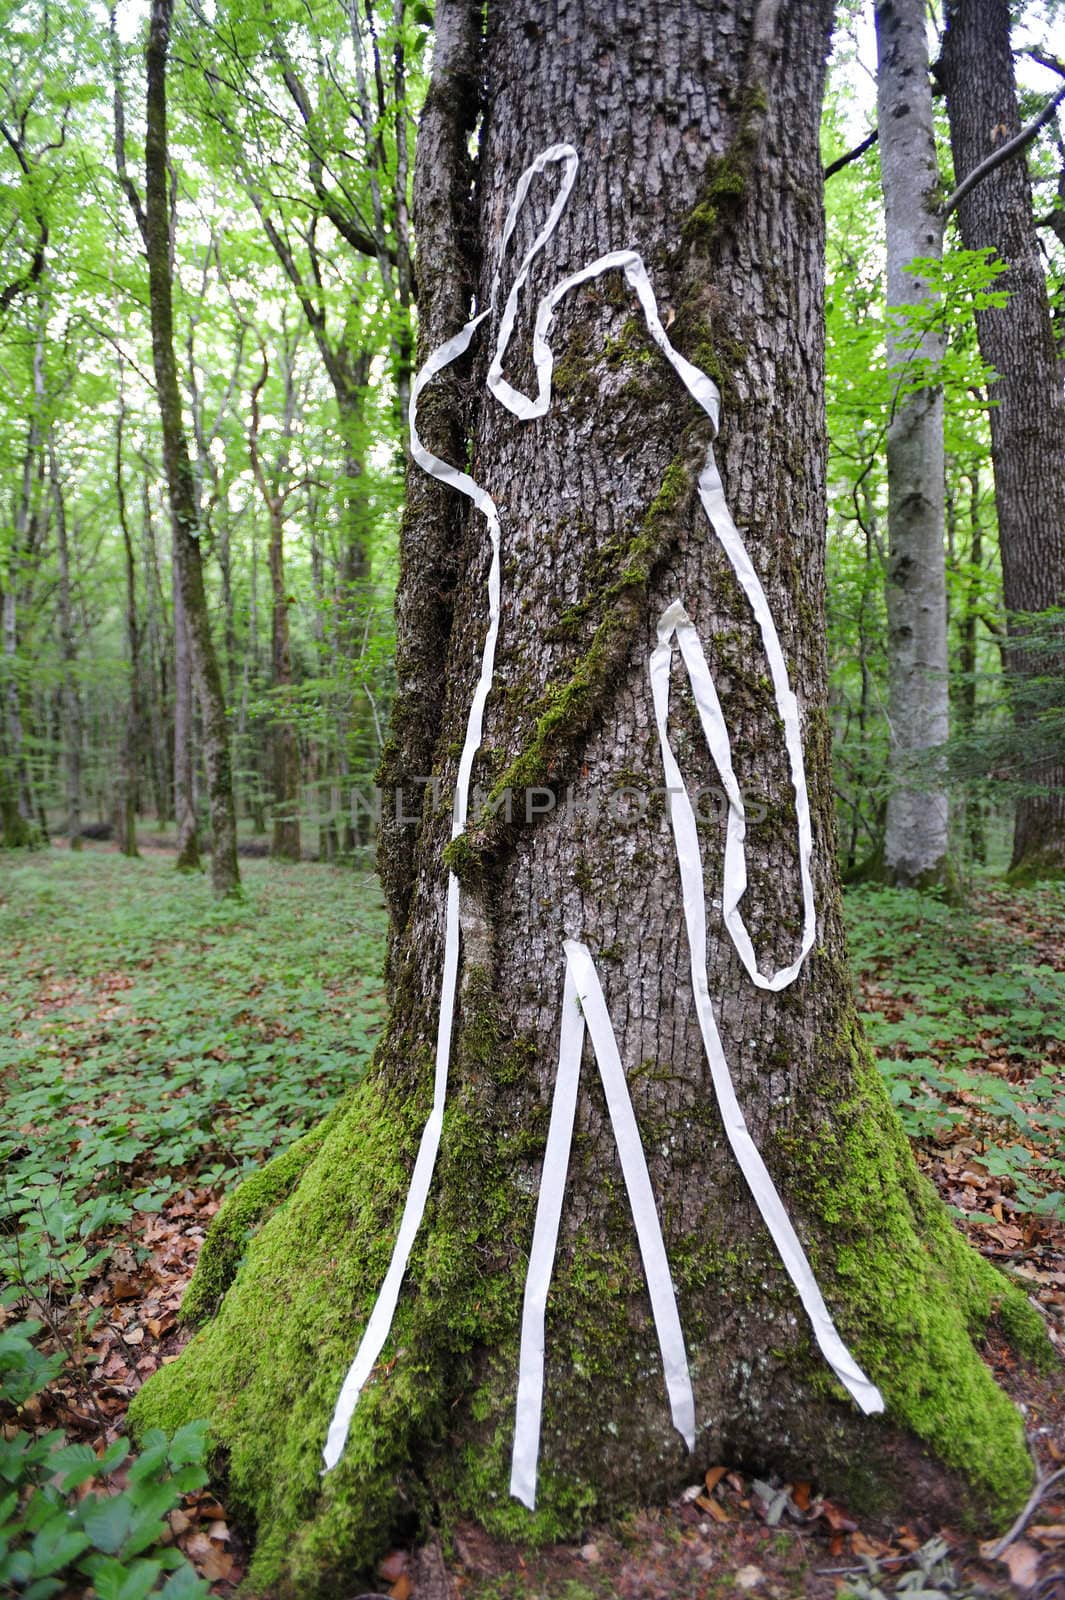 A scene of crime figure on a tree trunk in woodland